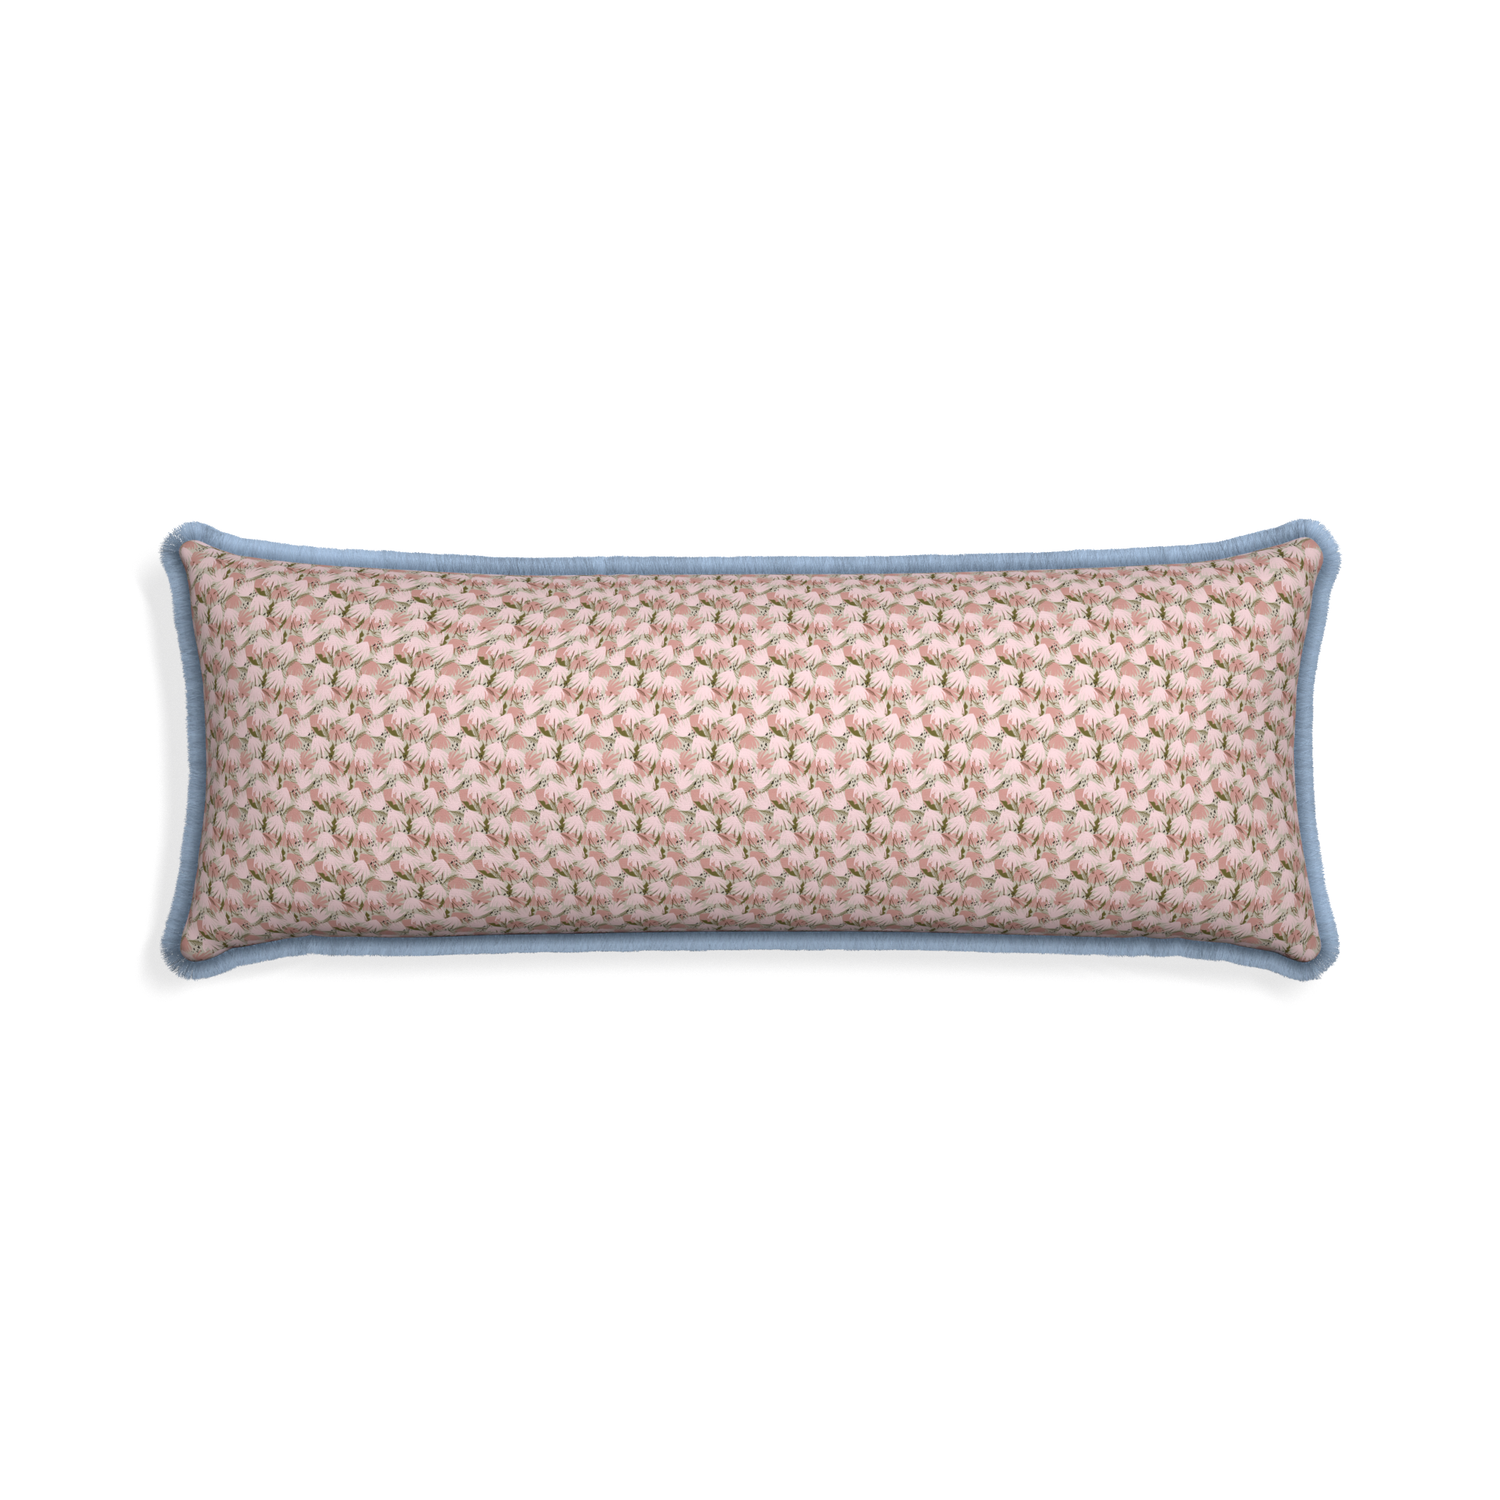 Xl-lumbar eden pink custom pink floralpillow with sky fringe on white background